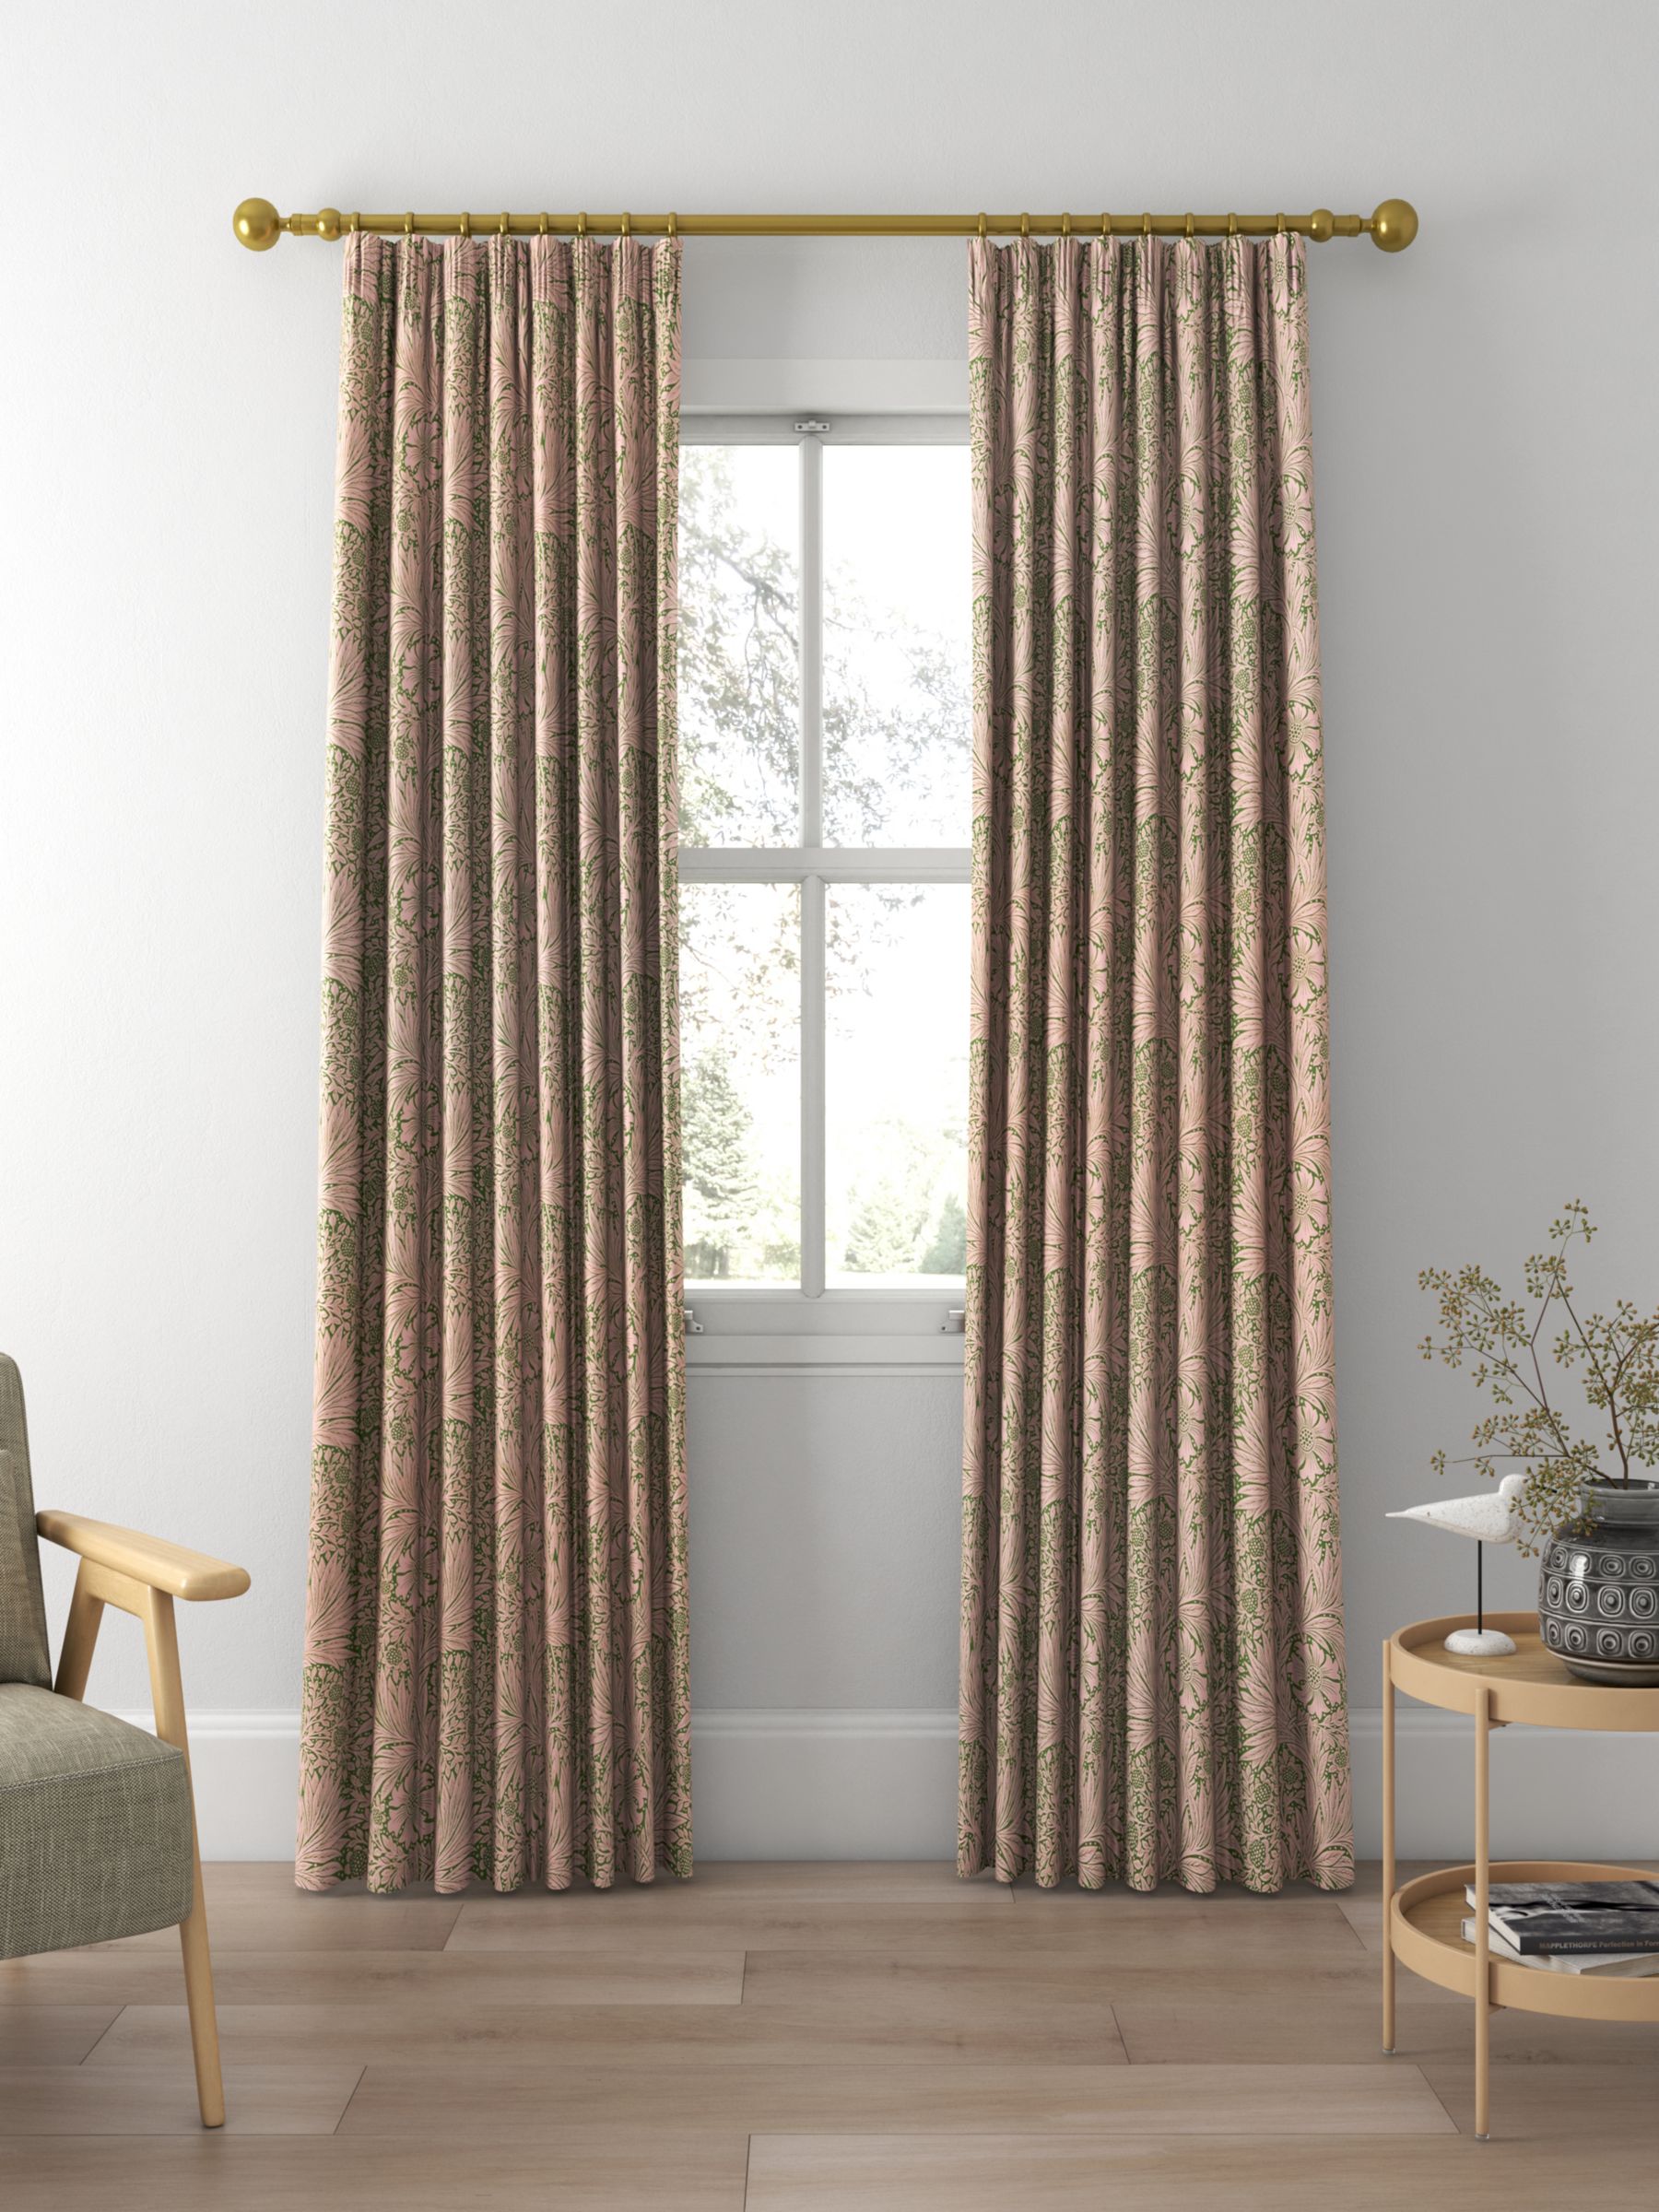 Morris & Co. Ben Pentreath Marigold Made to Measure Curtains, Olive/Pink